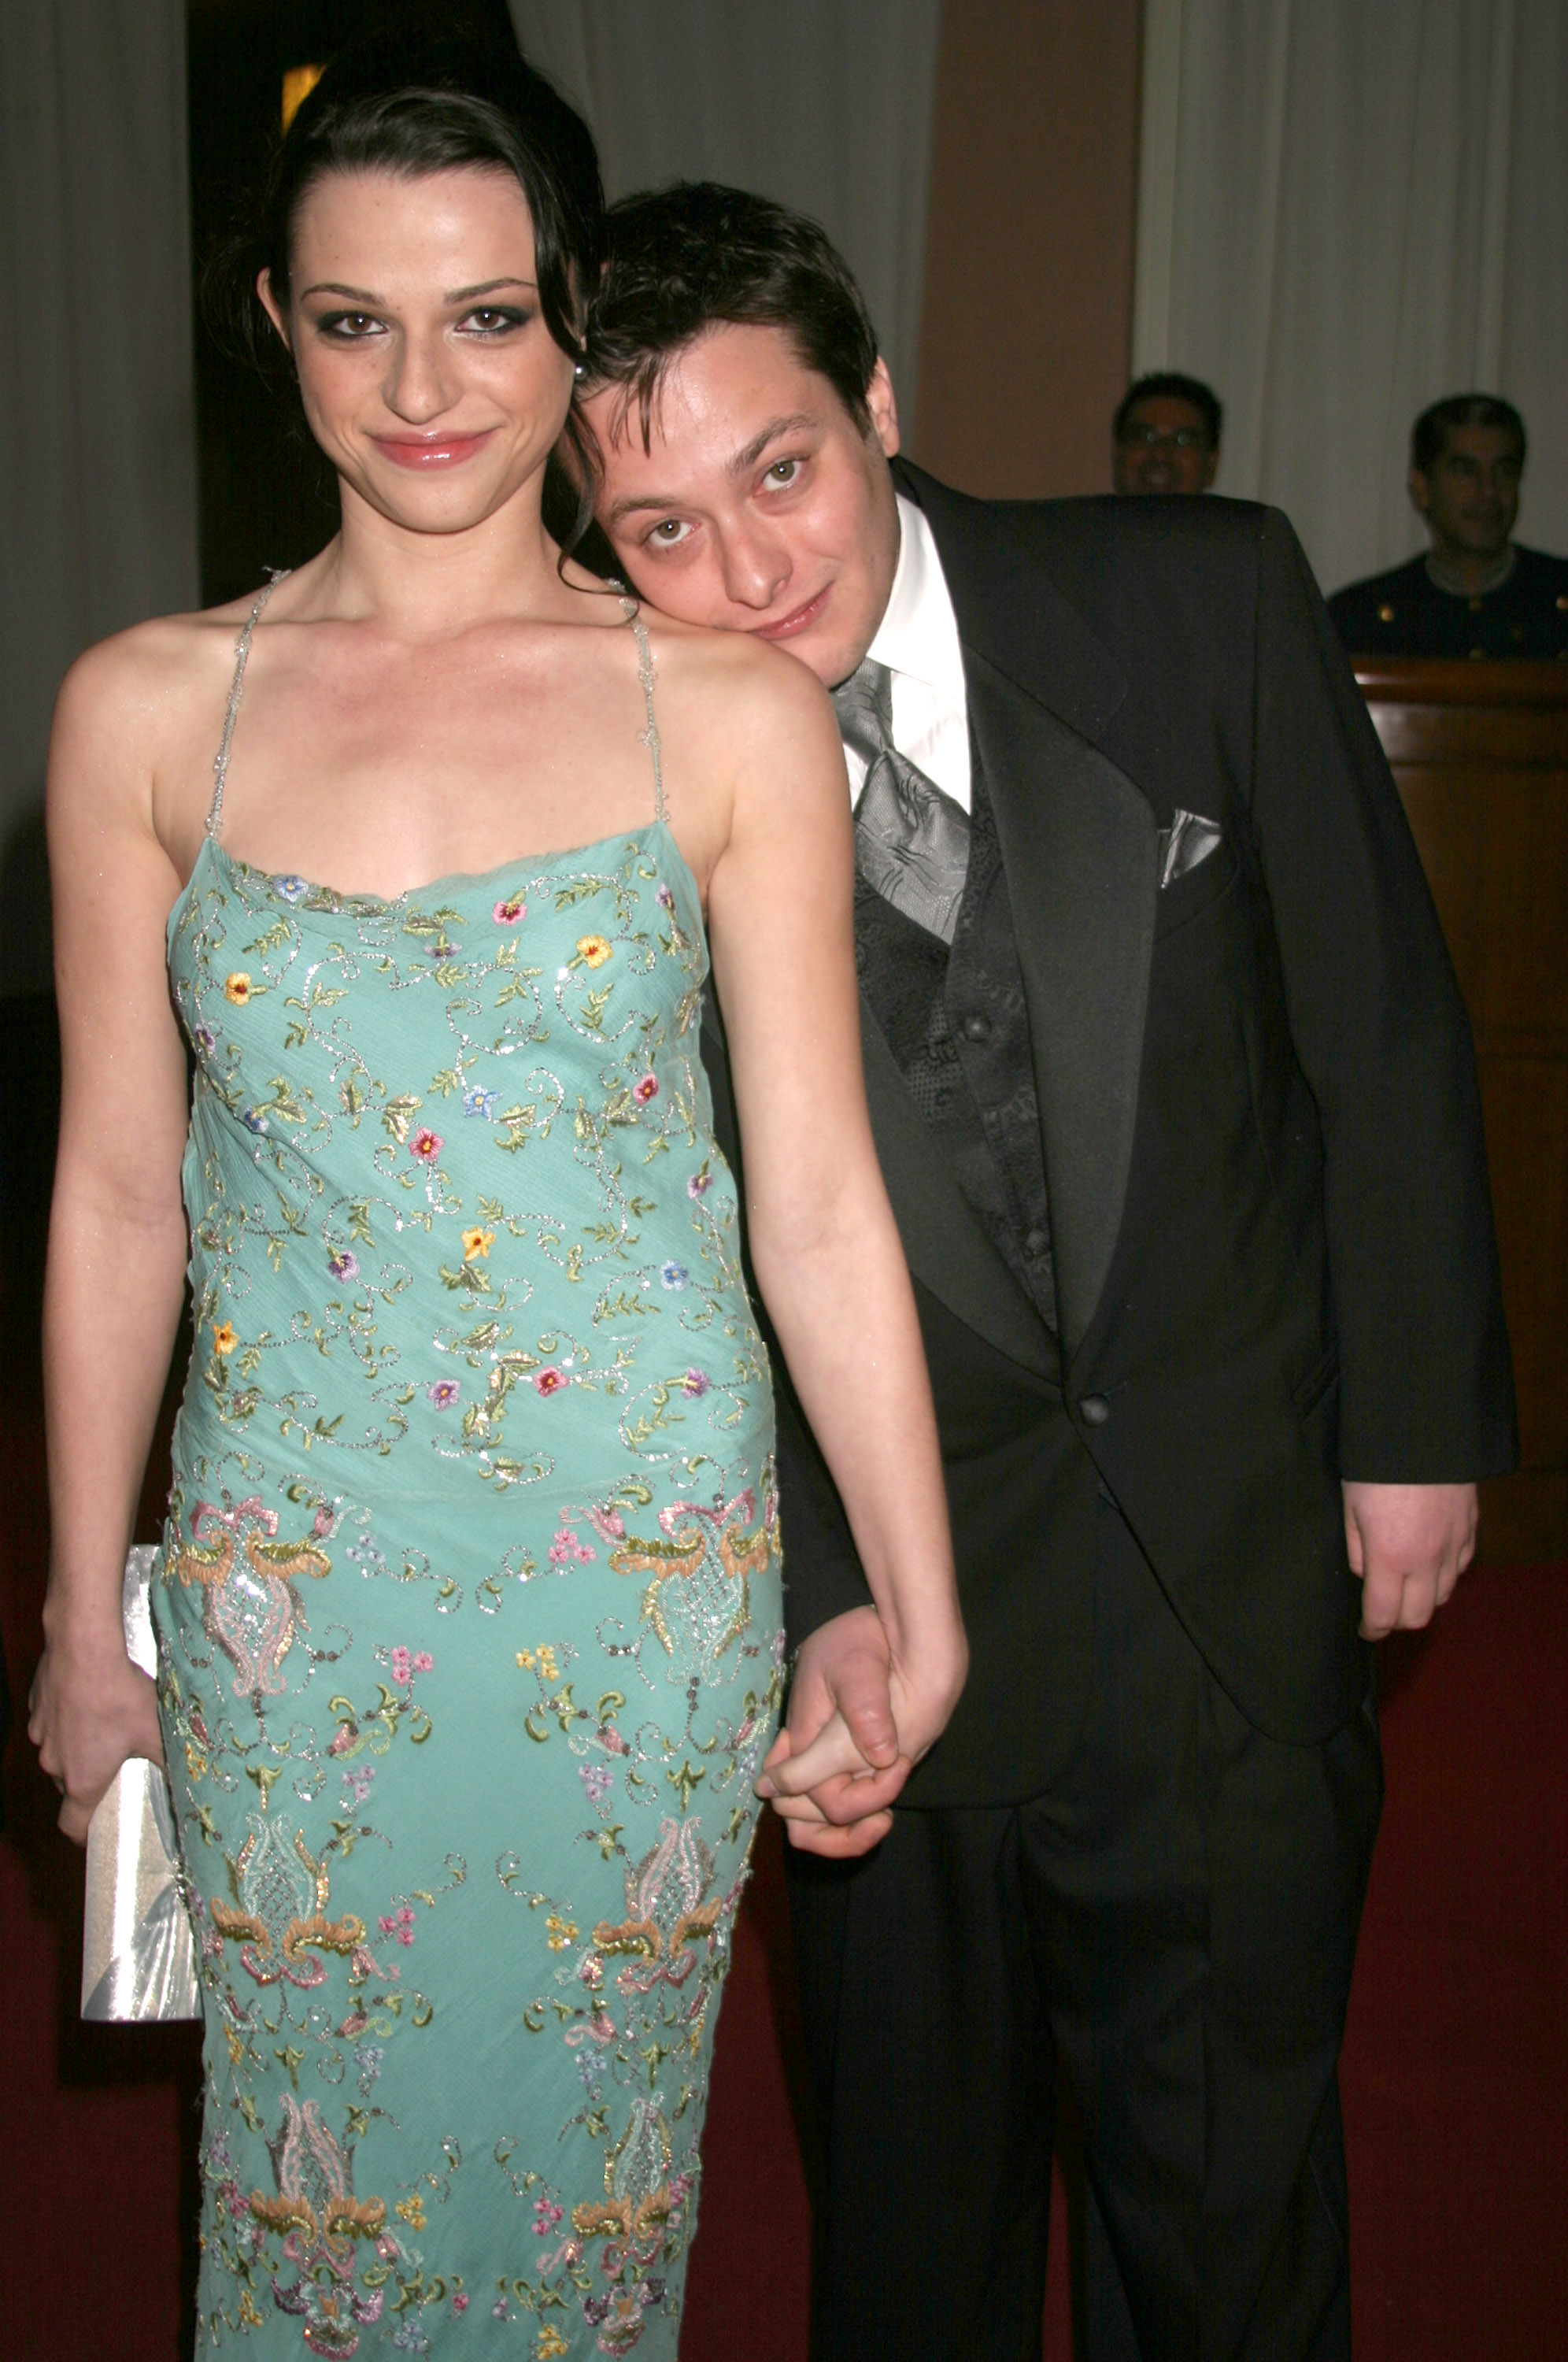 Rachel Bella and Edward Furlong at the 15th Annual Night of 100 Stars Black Tie Oscar Gala on February 27, 2005 | Source: Getty Images